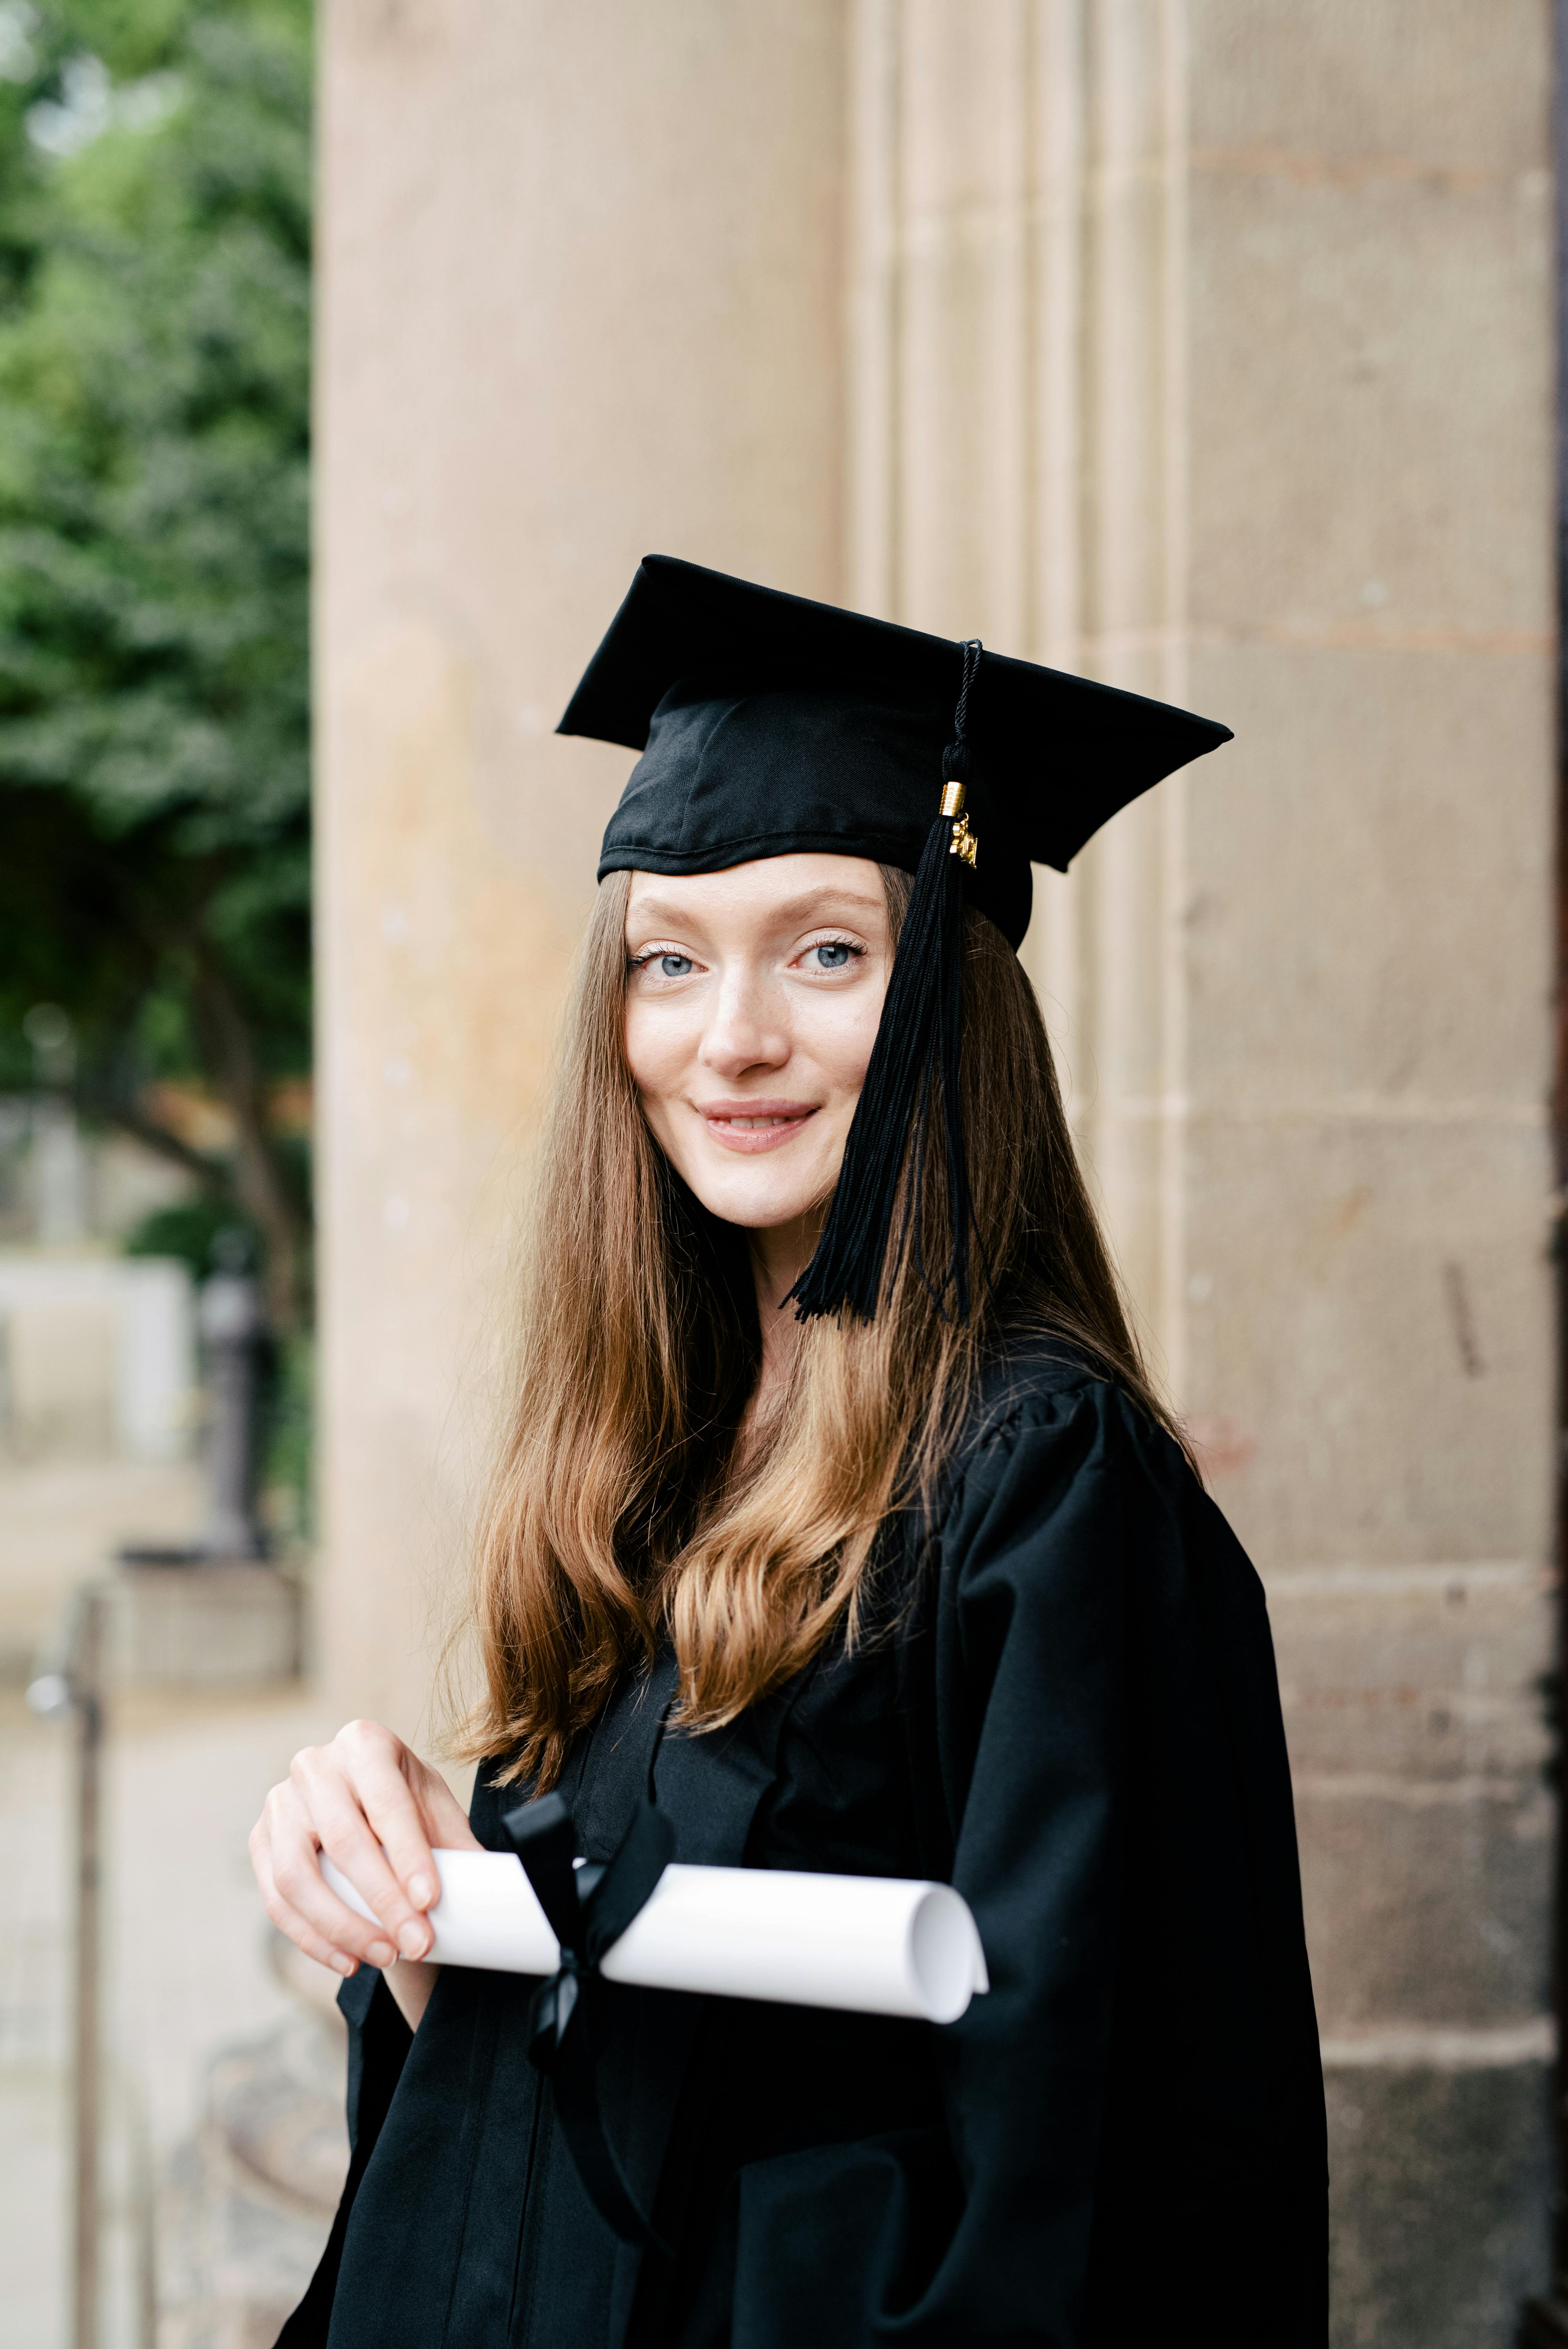 Why Do Graduates Wear Caps and Gowns?